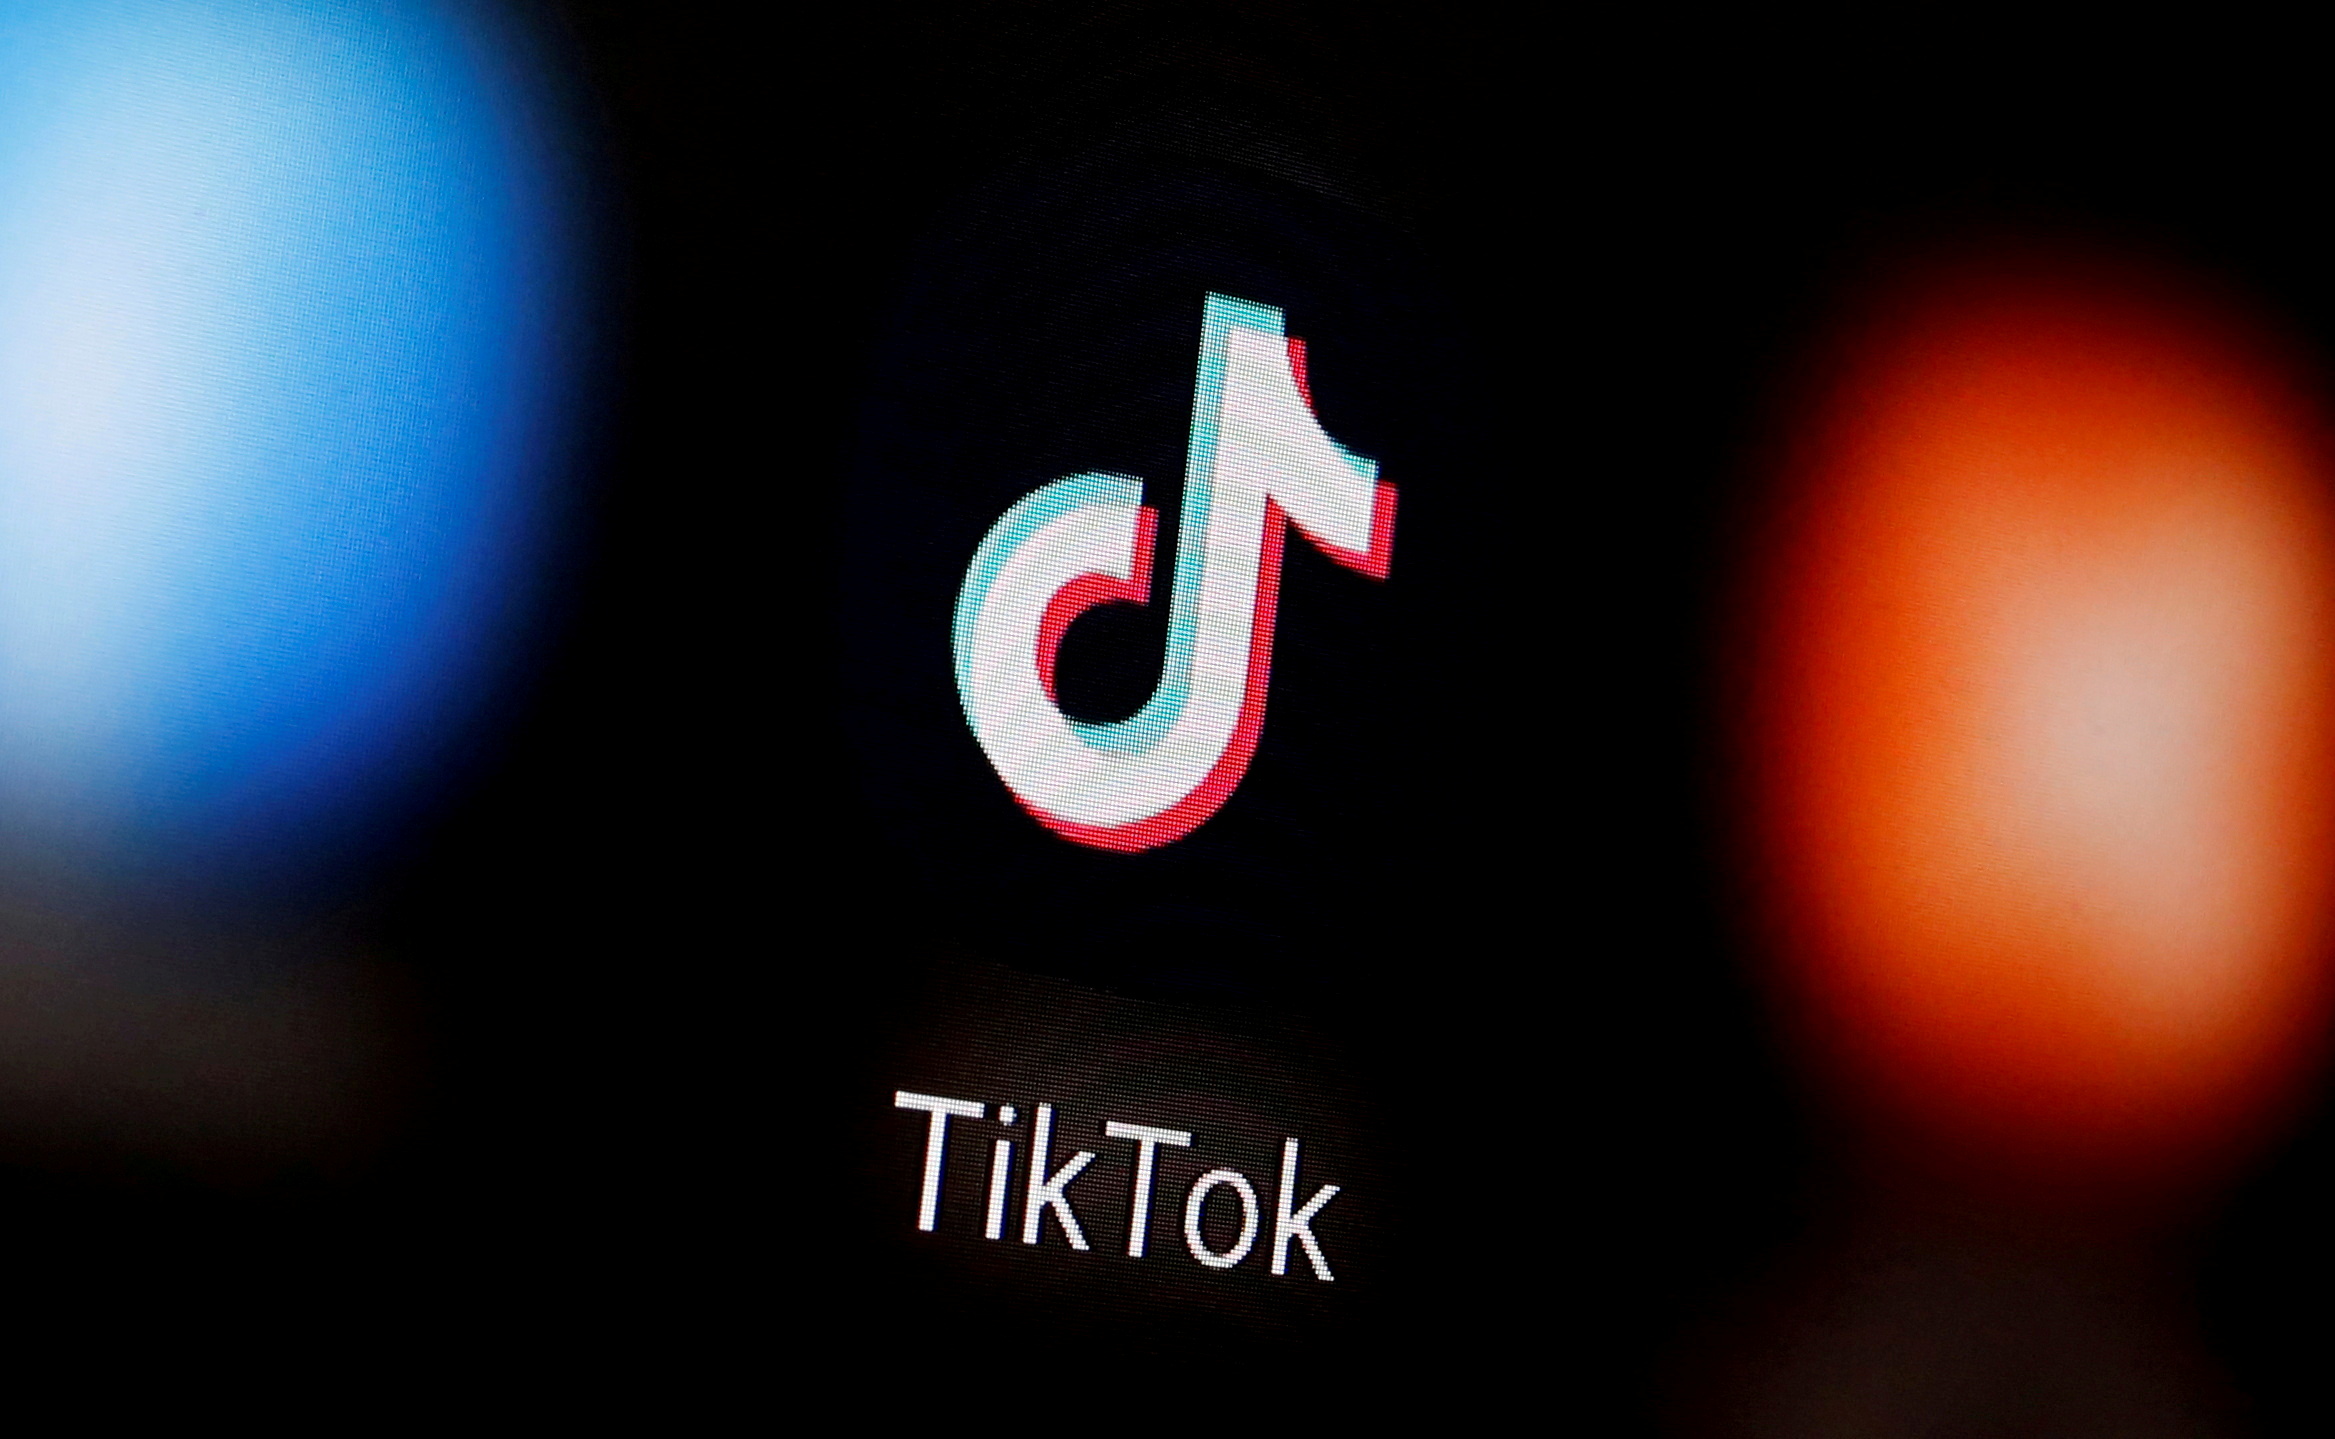 A TikTok logo is displayed on a smartphone in this illustration taken January 6, 2020. REUTERS/Dado Ruvic